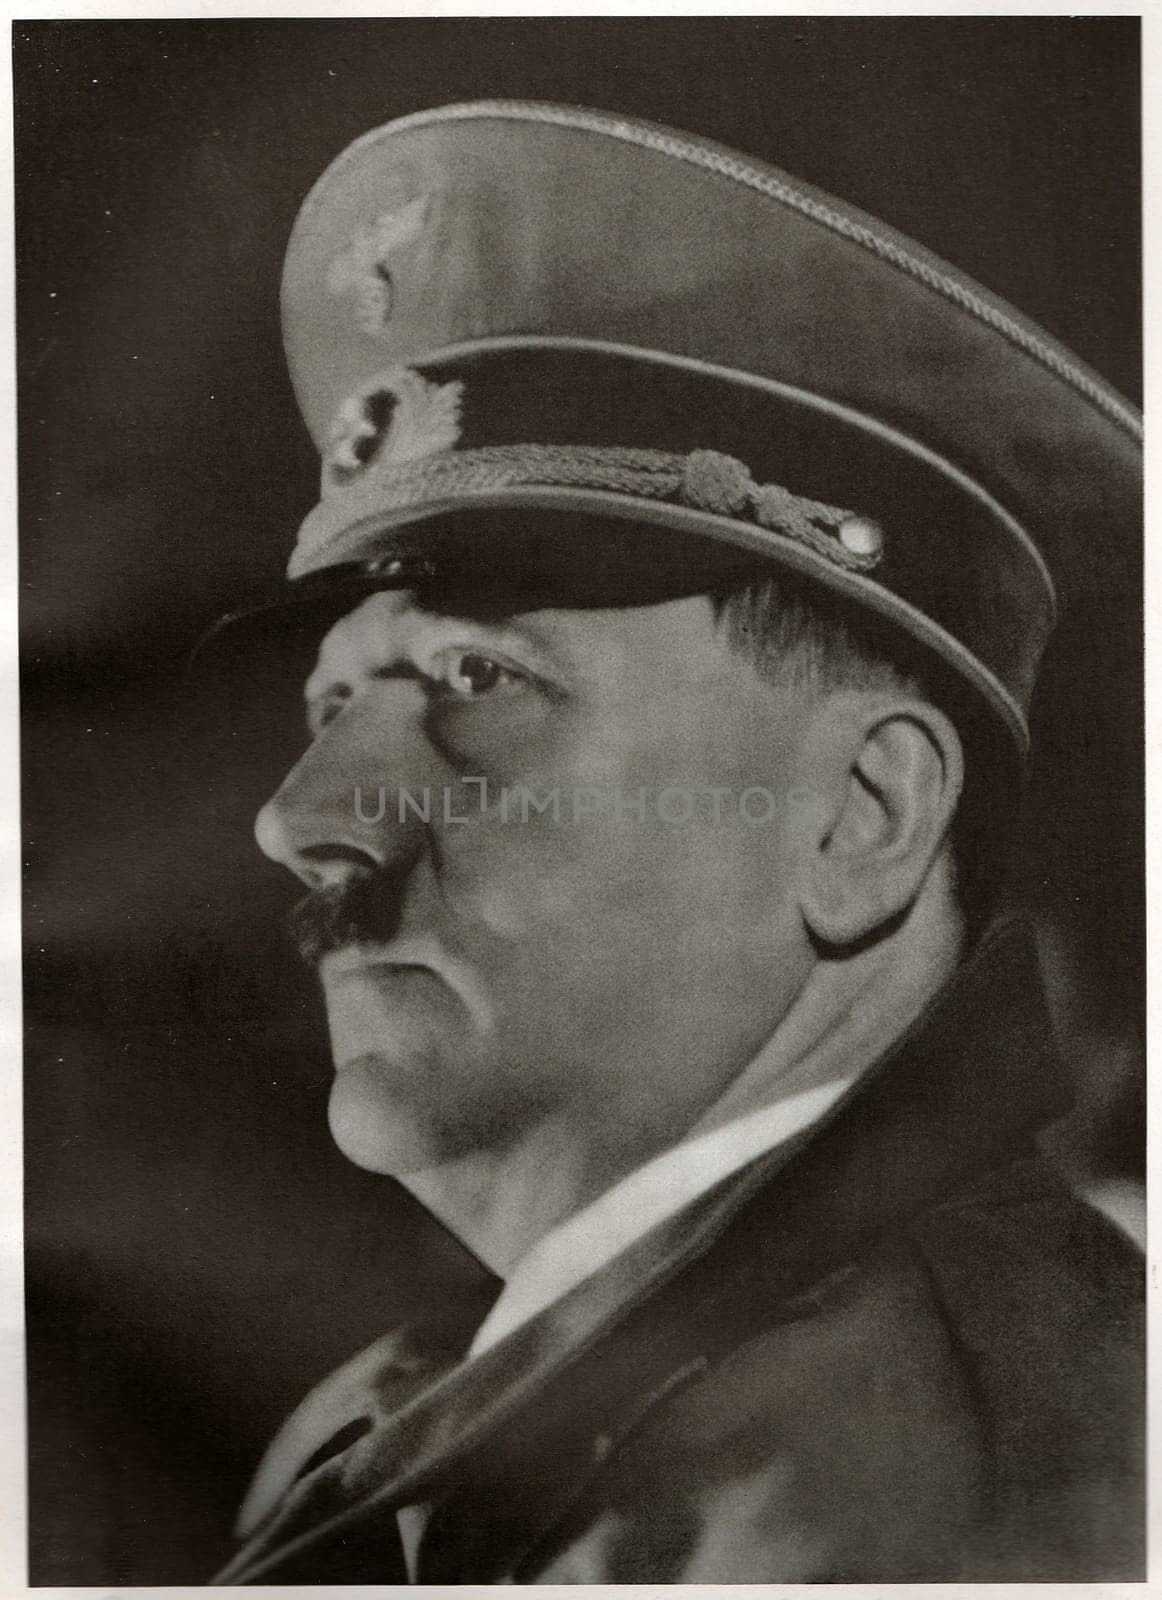 Hitler declares Germany and Austria (Ostmark) united as one entity, the beginning of the GroÃ deutsches Reich (Greater German Empire). Emotional speech from the balcony of the Linz town hall. Reproduction of antique photo. by roman_nerud